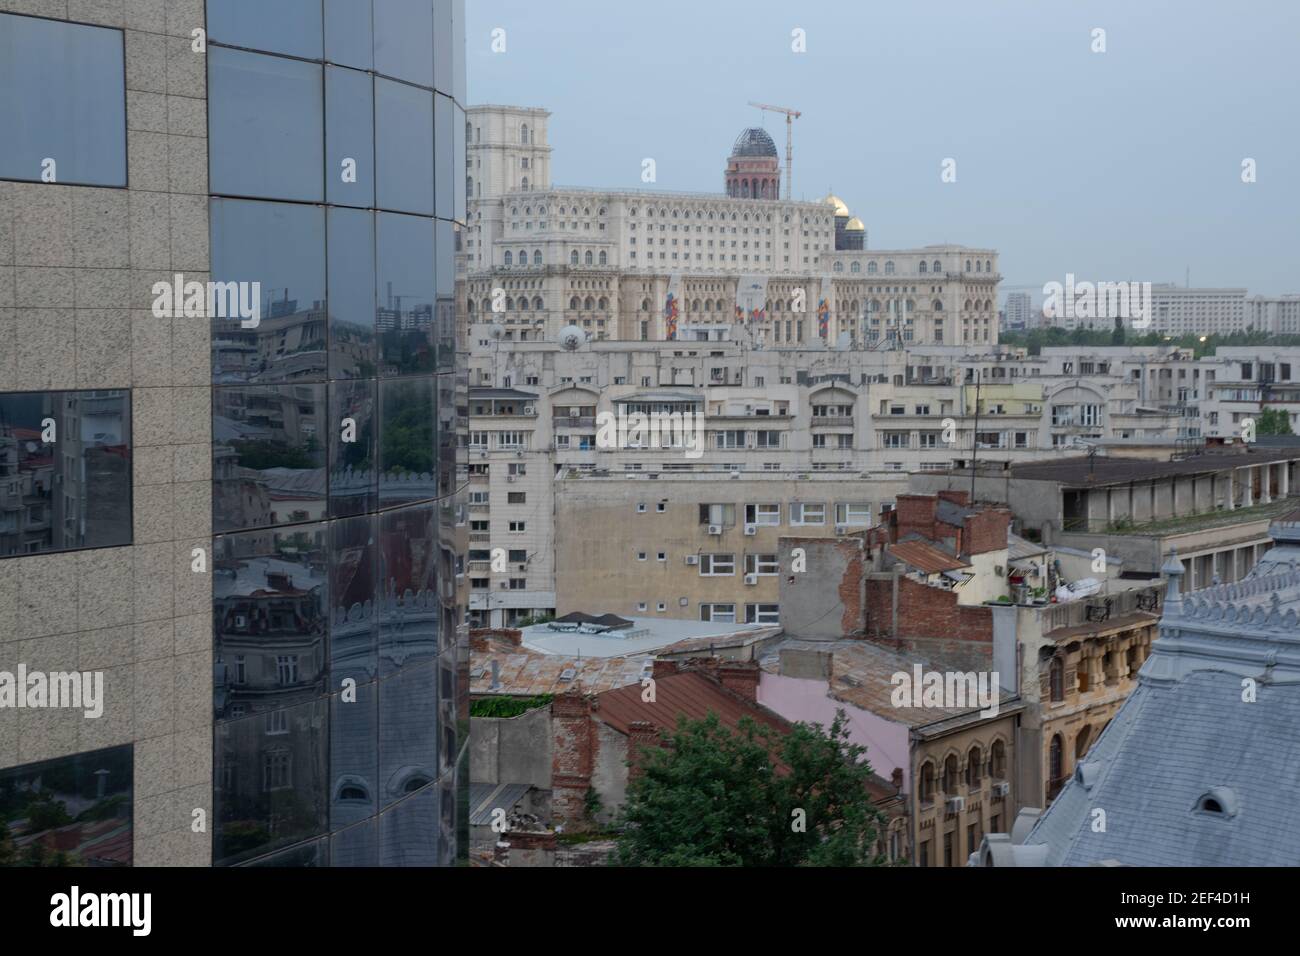 Overview of a variety of contrasting architectural styles of buildings in Bucharest, Romania, cityscape dominated by government building. Stock Photo